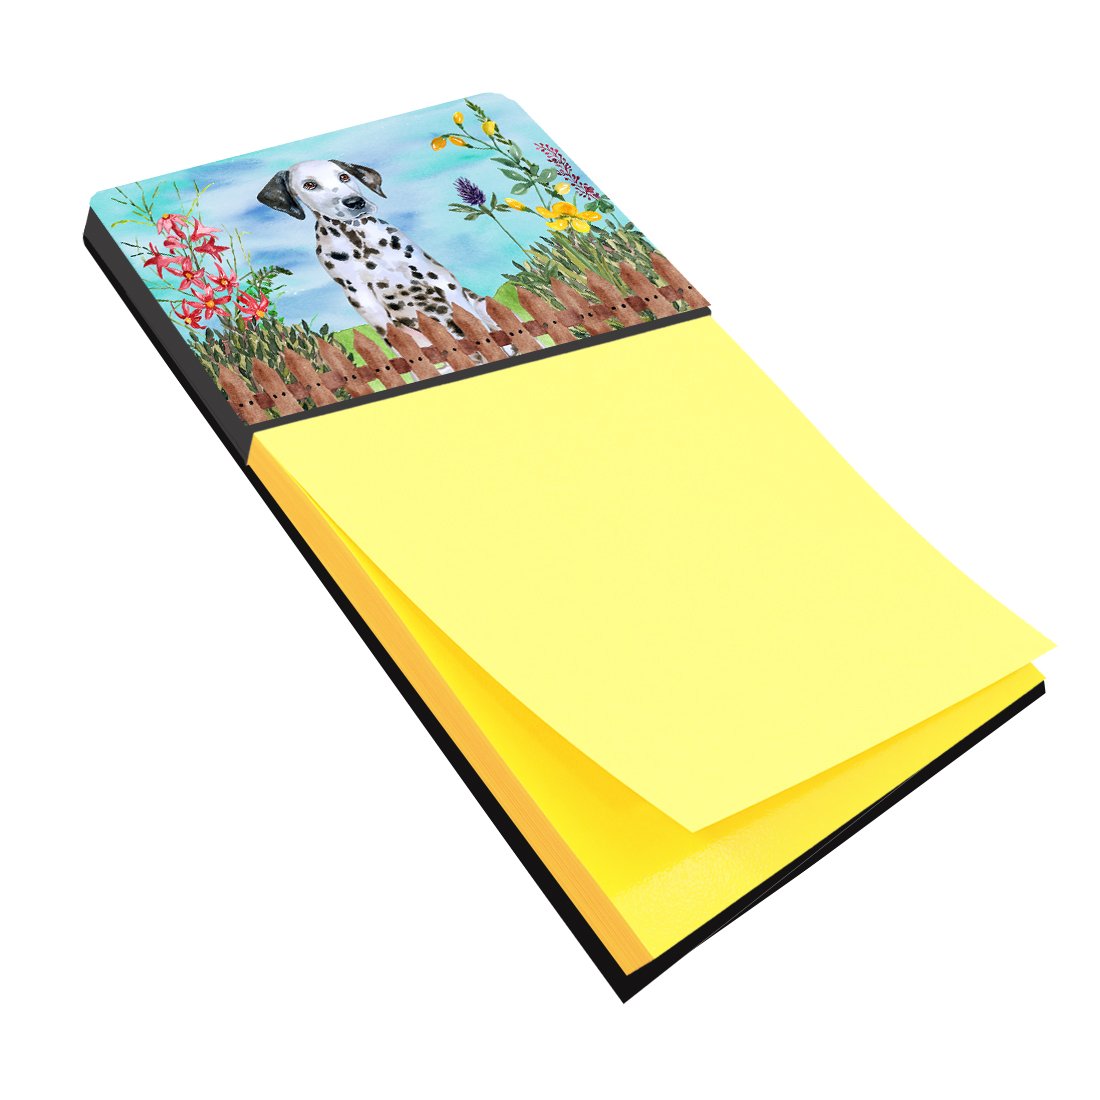 Dalmatian Puppy Spring Sticky Note Holder CK1270SN by Caroline's Treasures